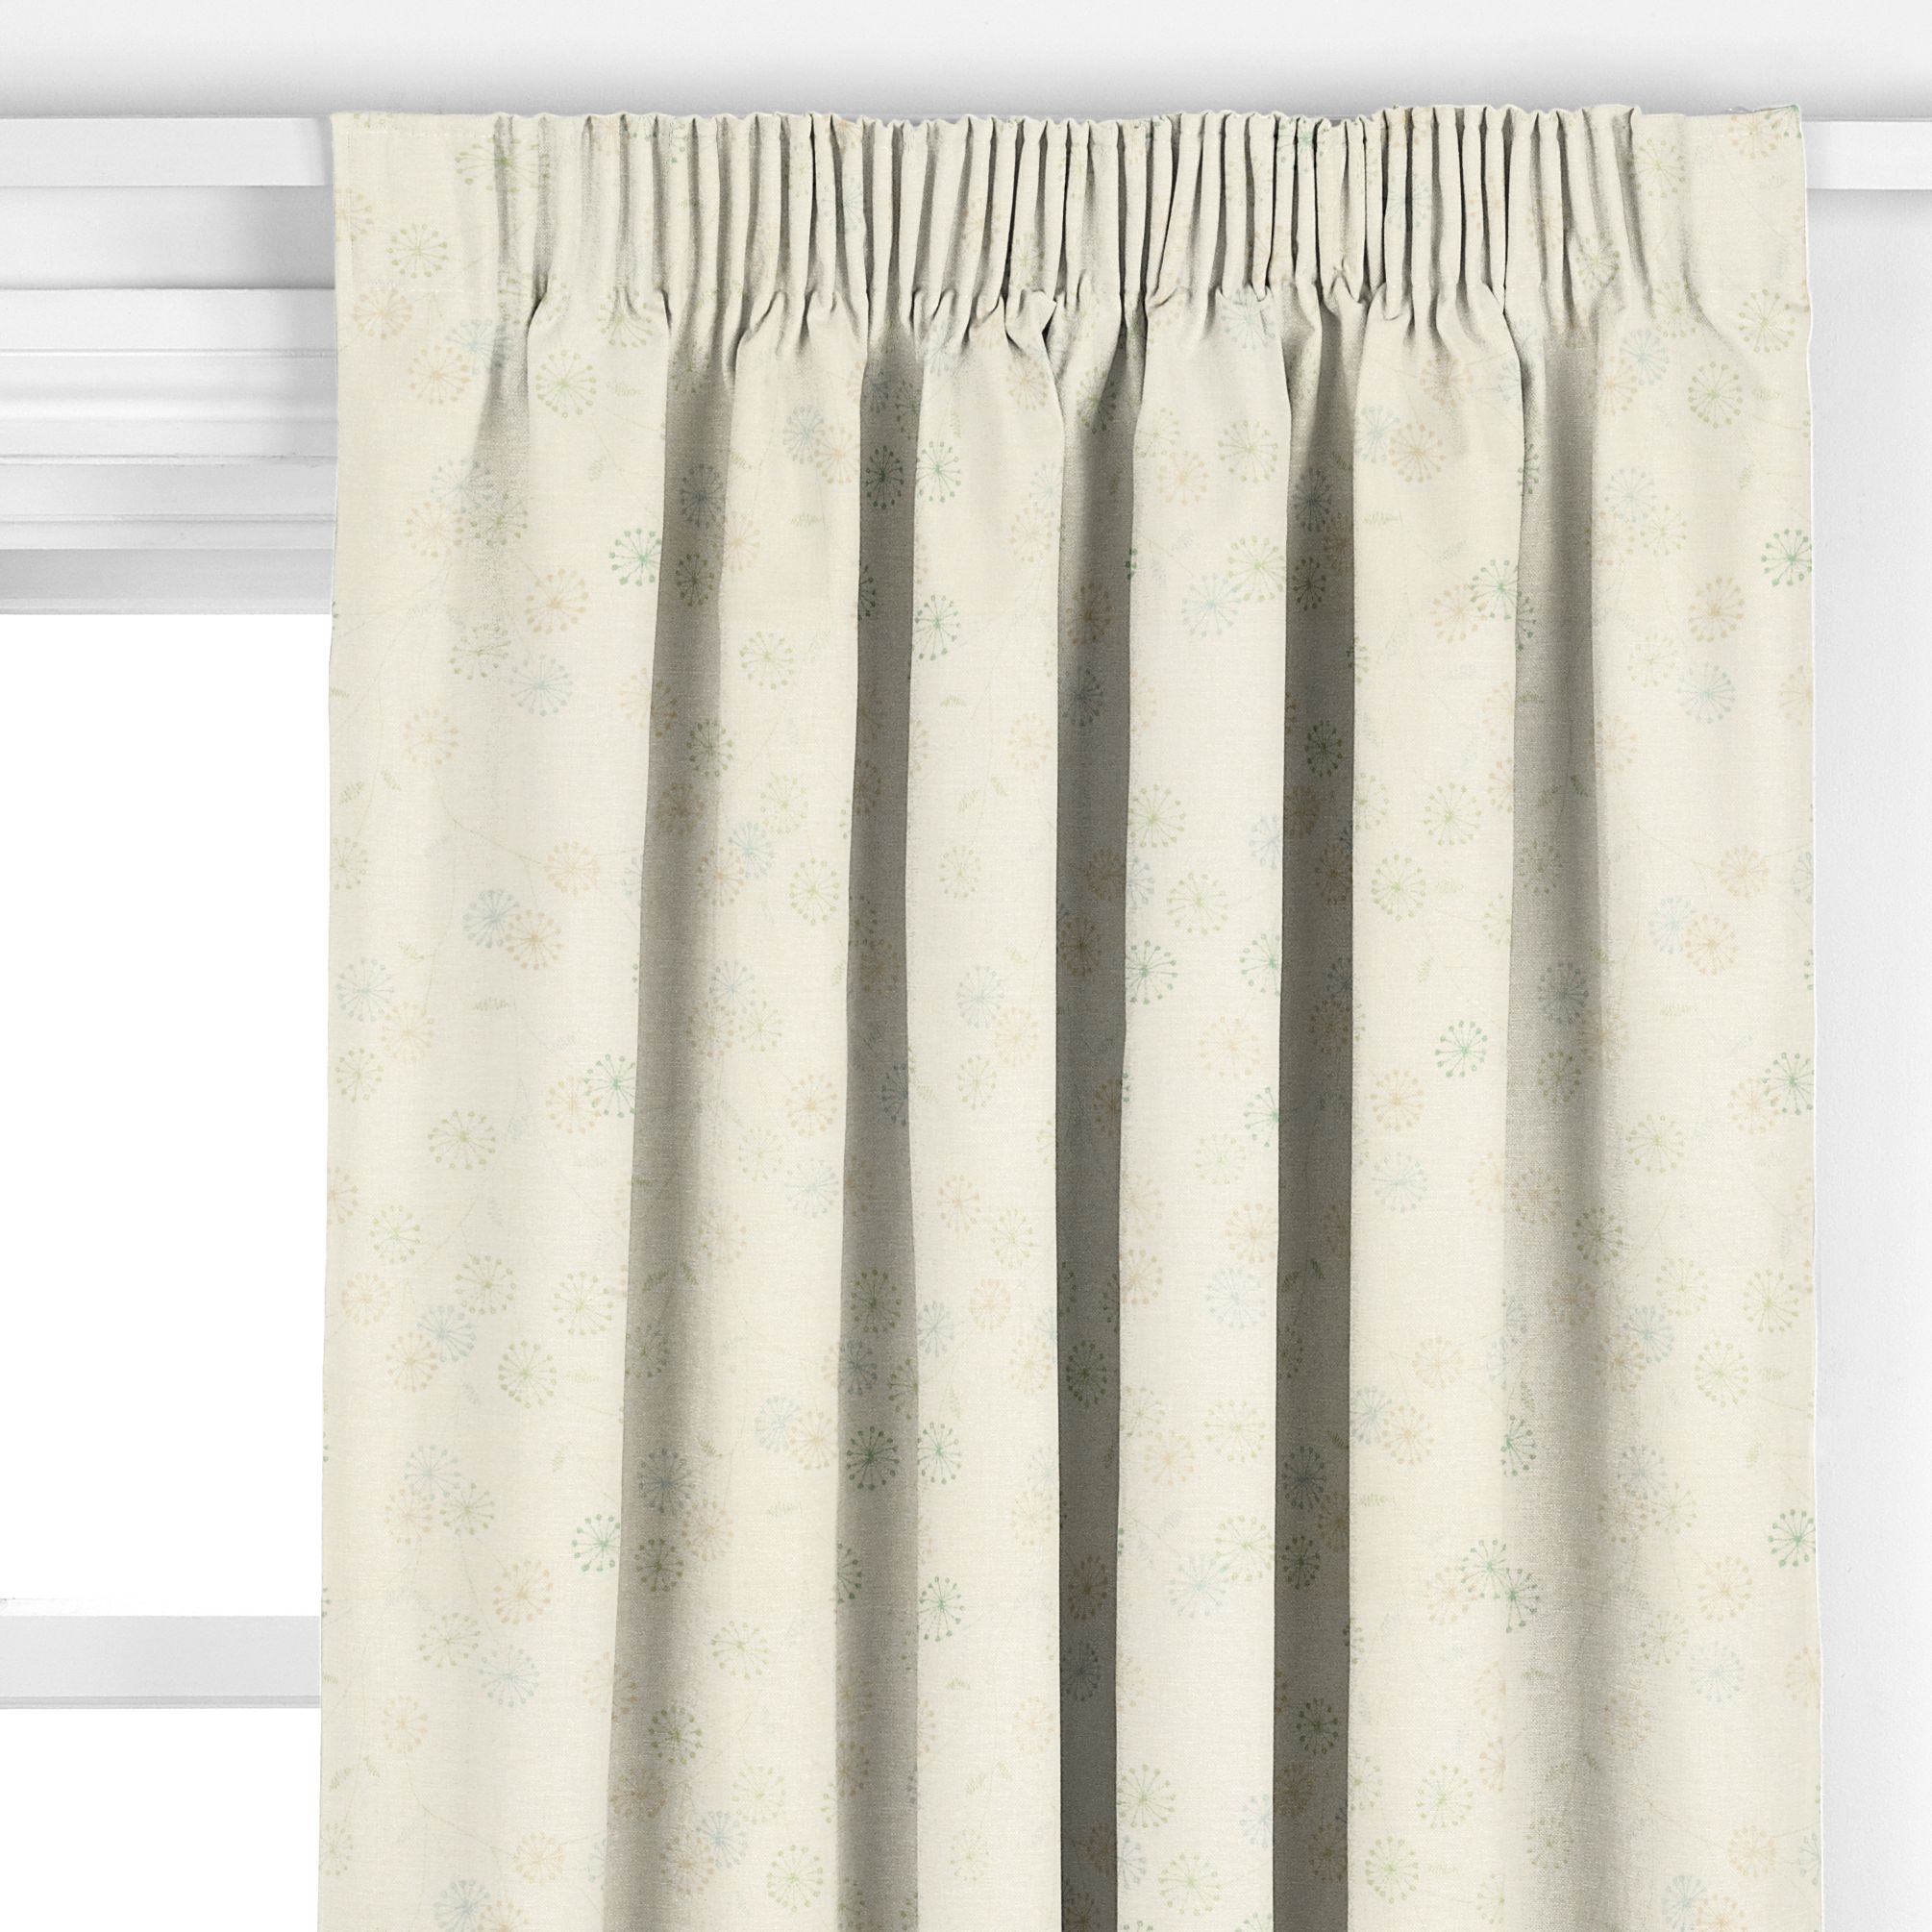 Mimosa Pencil Pleat Curtains, Duck Egg